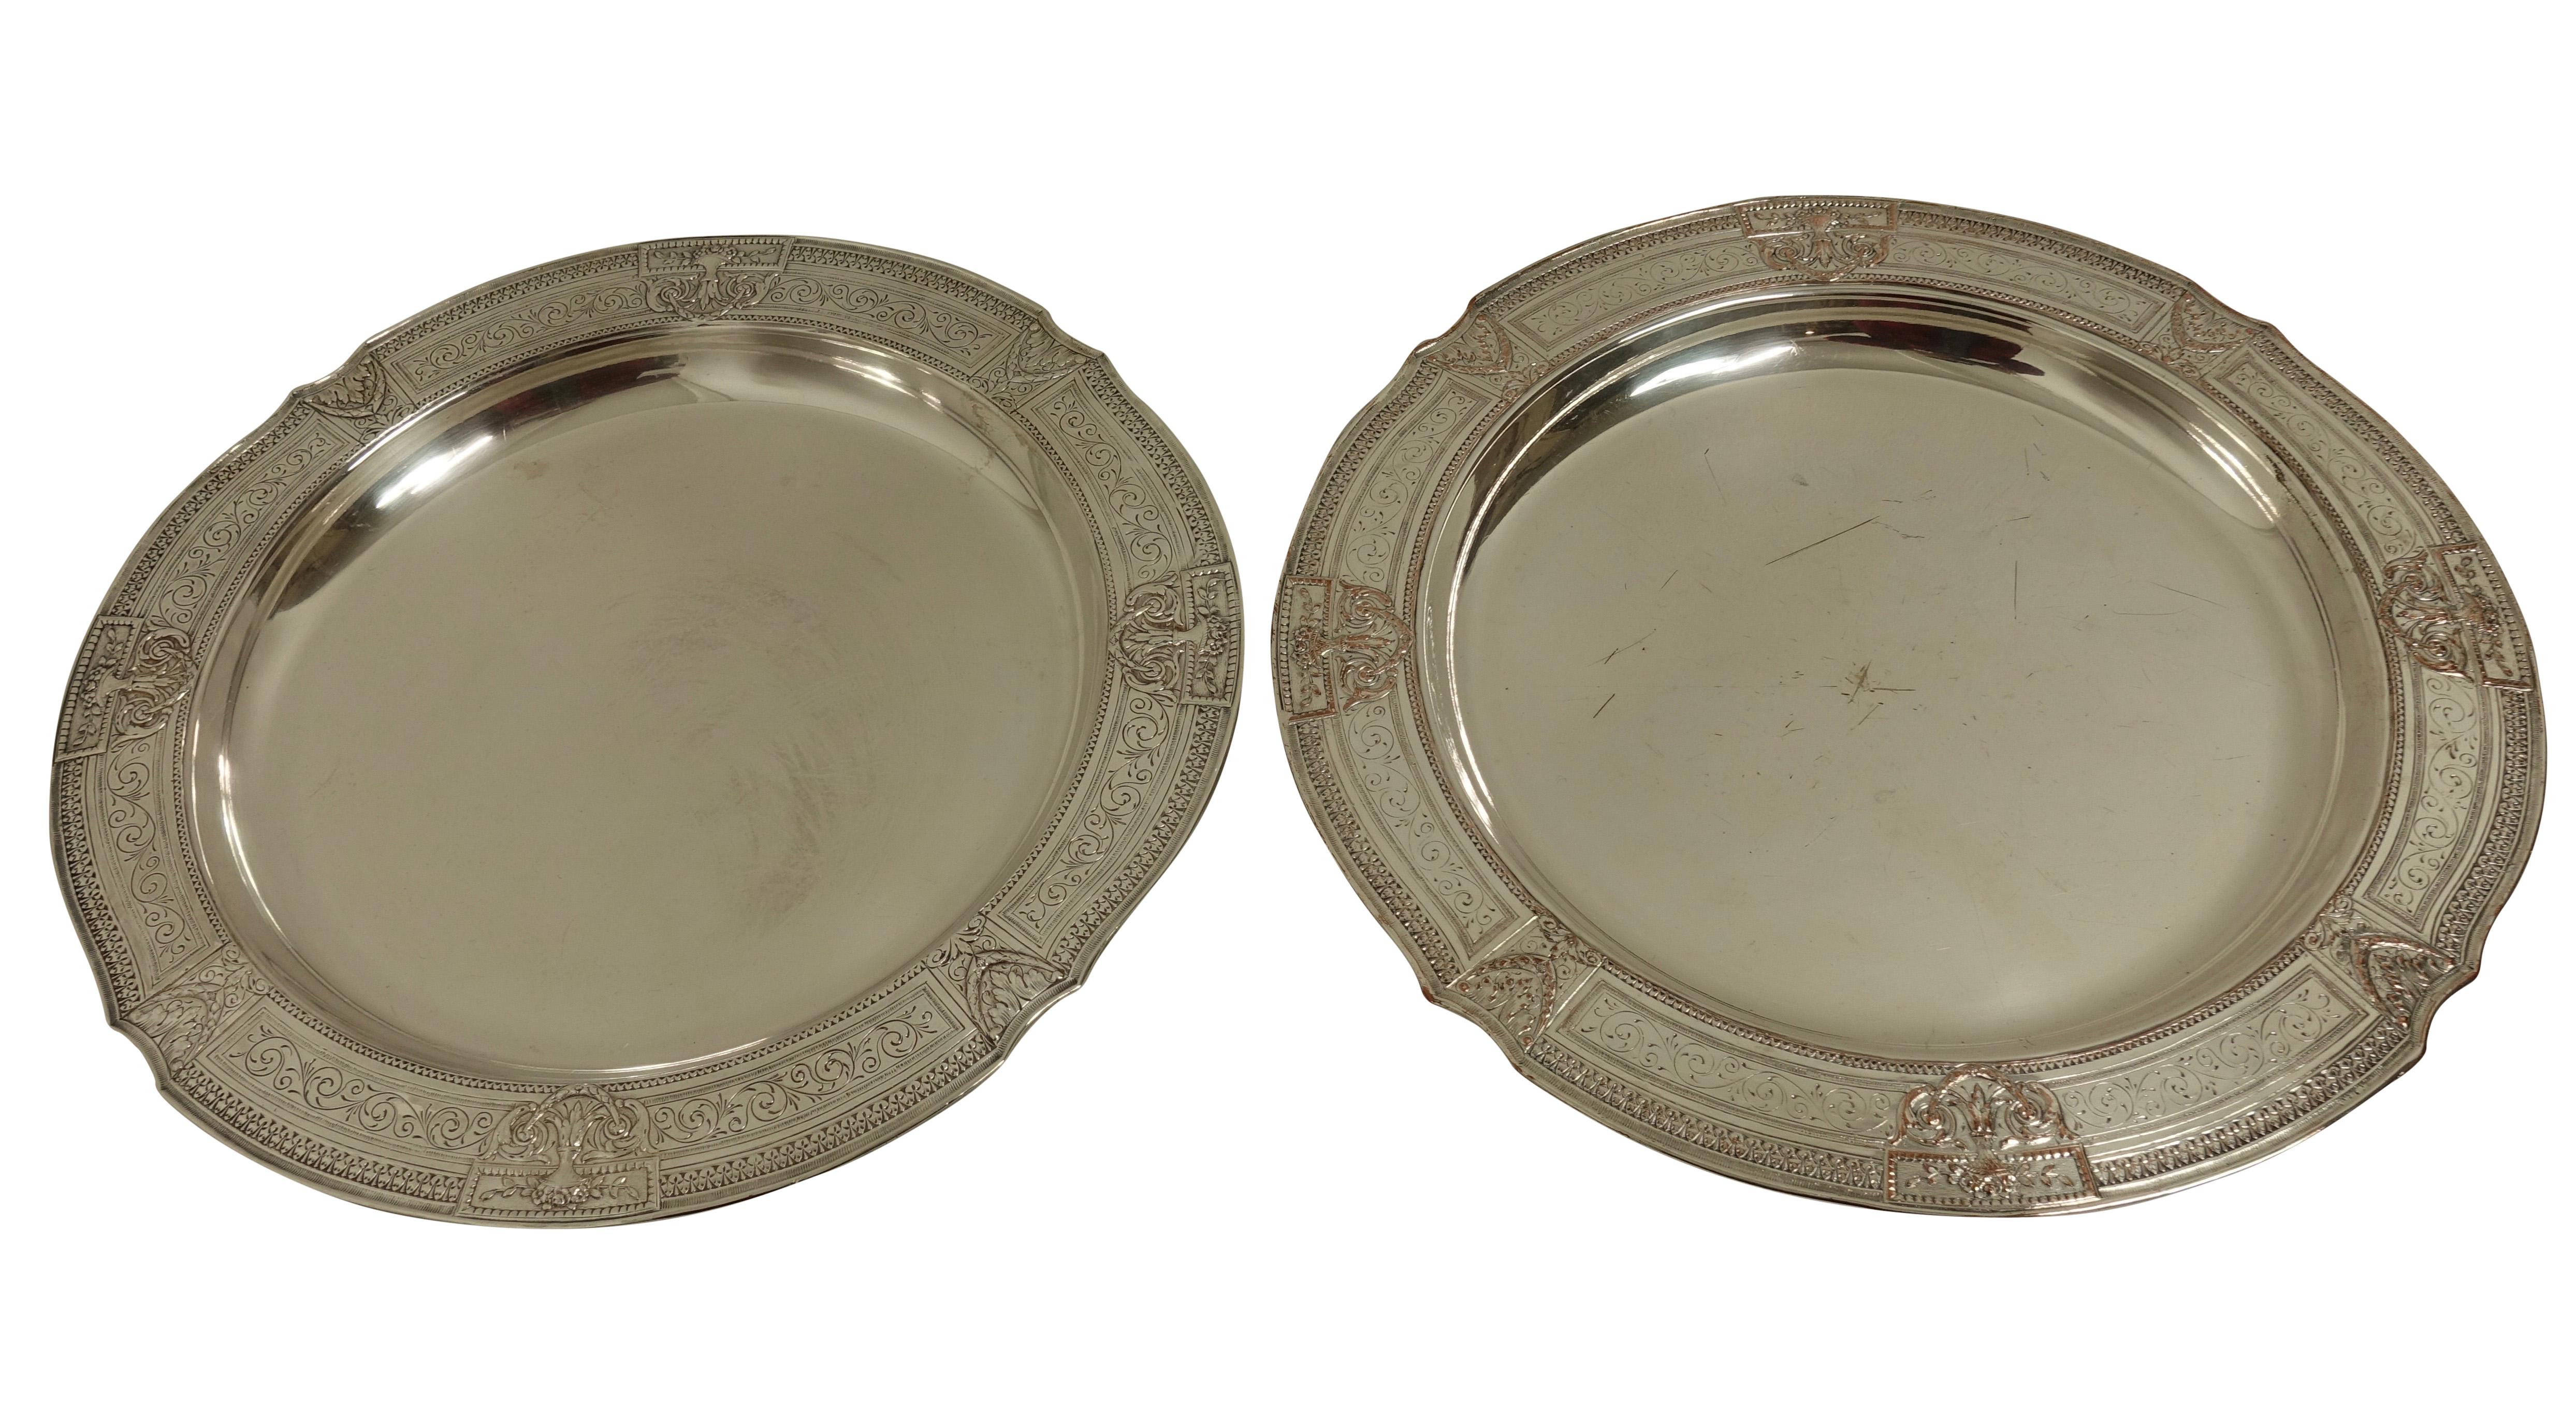 Neoclassical Pair of Round Silver Plate Trays E G Webster New York